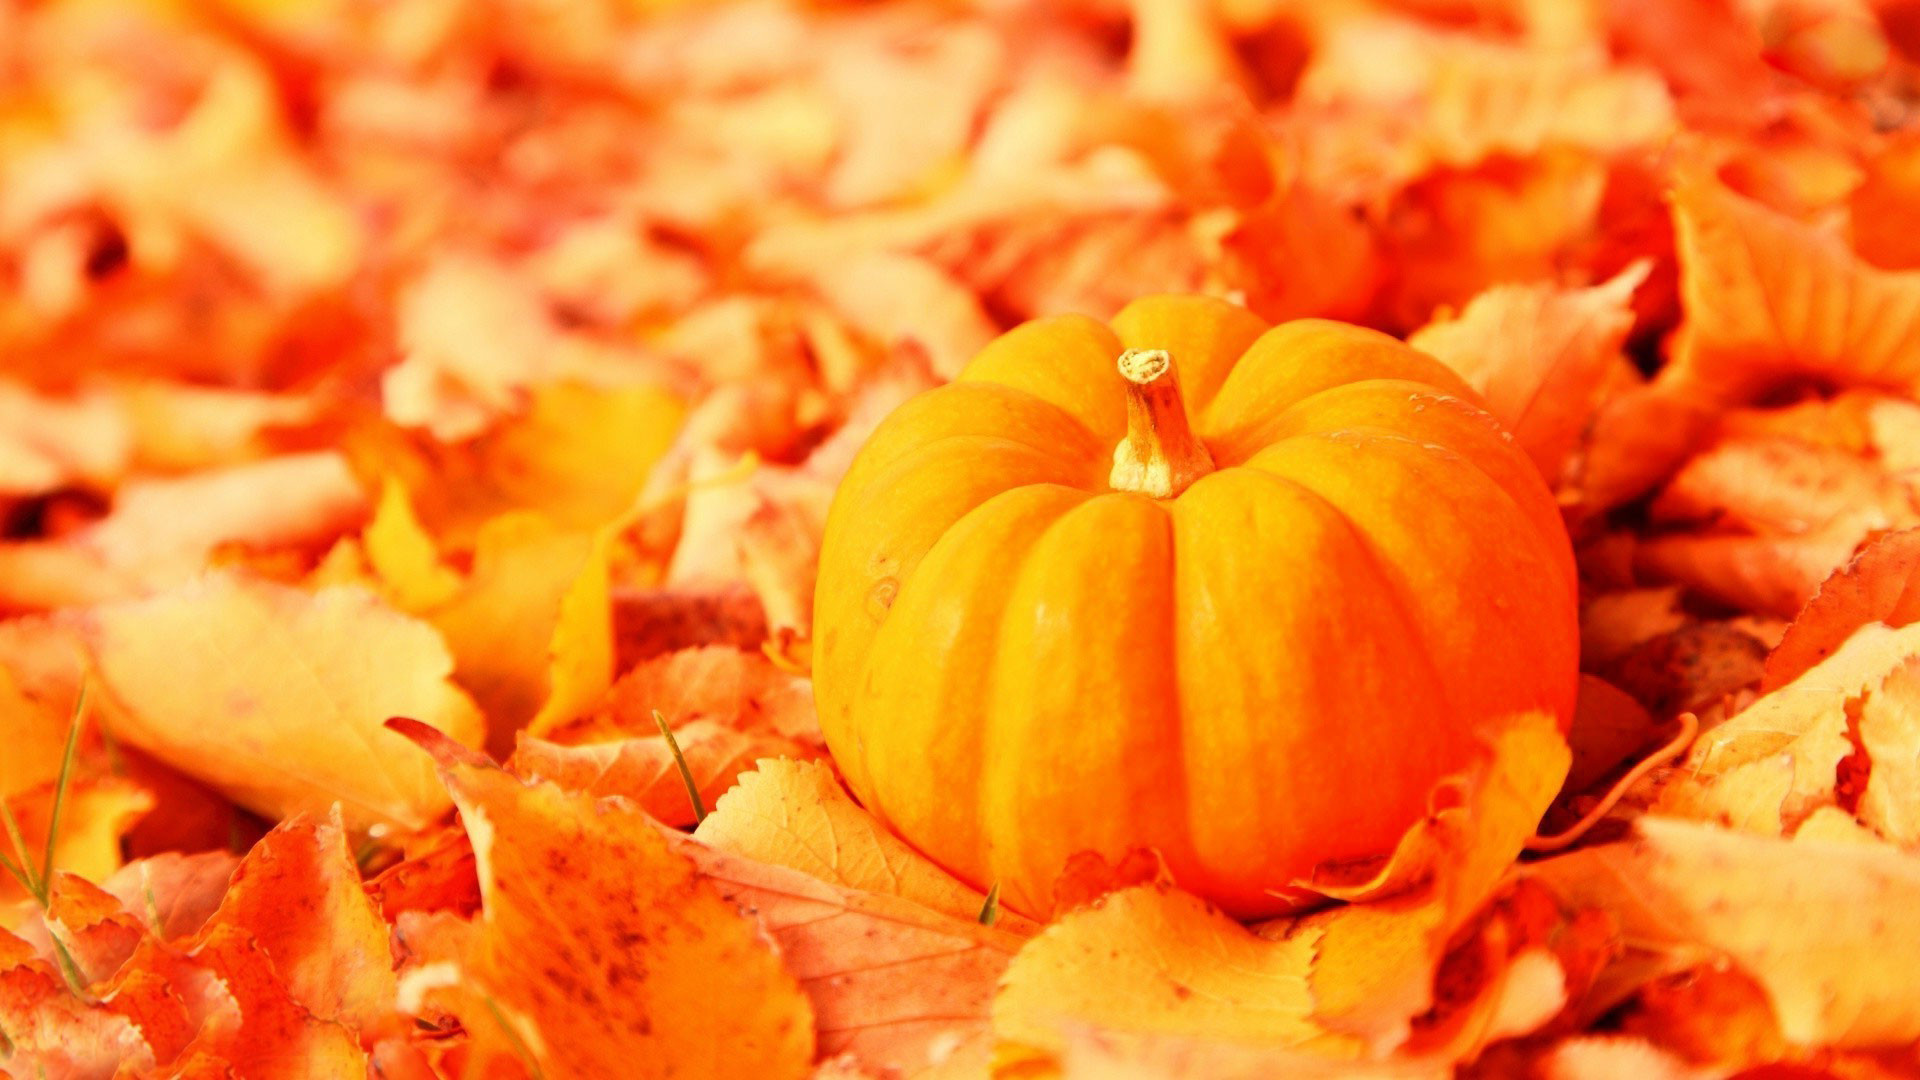 1920x1080 ... by a keyword 'lot backgrounds pumpkin'. All images were carefully  selected for you in the global network and can only be used by the author's  right.